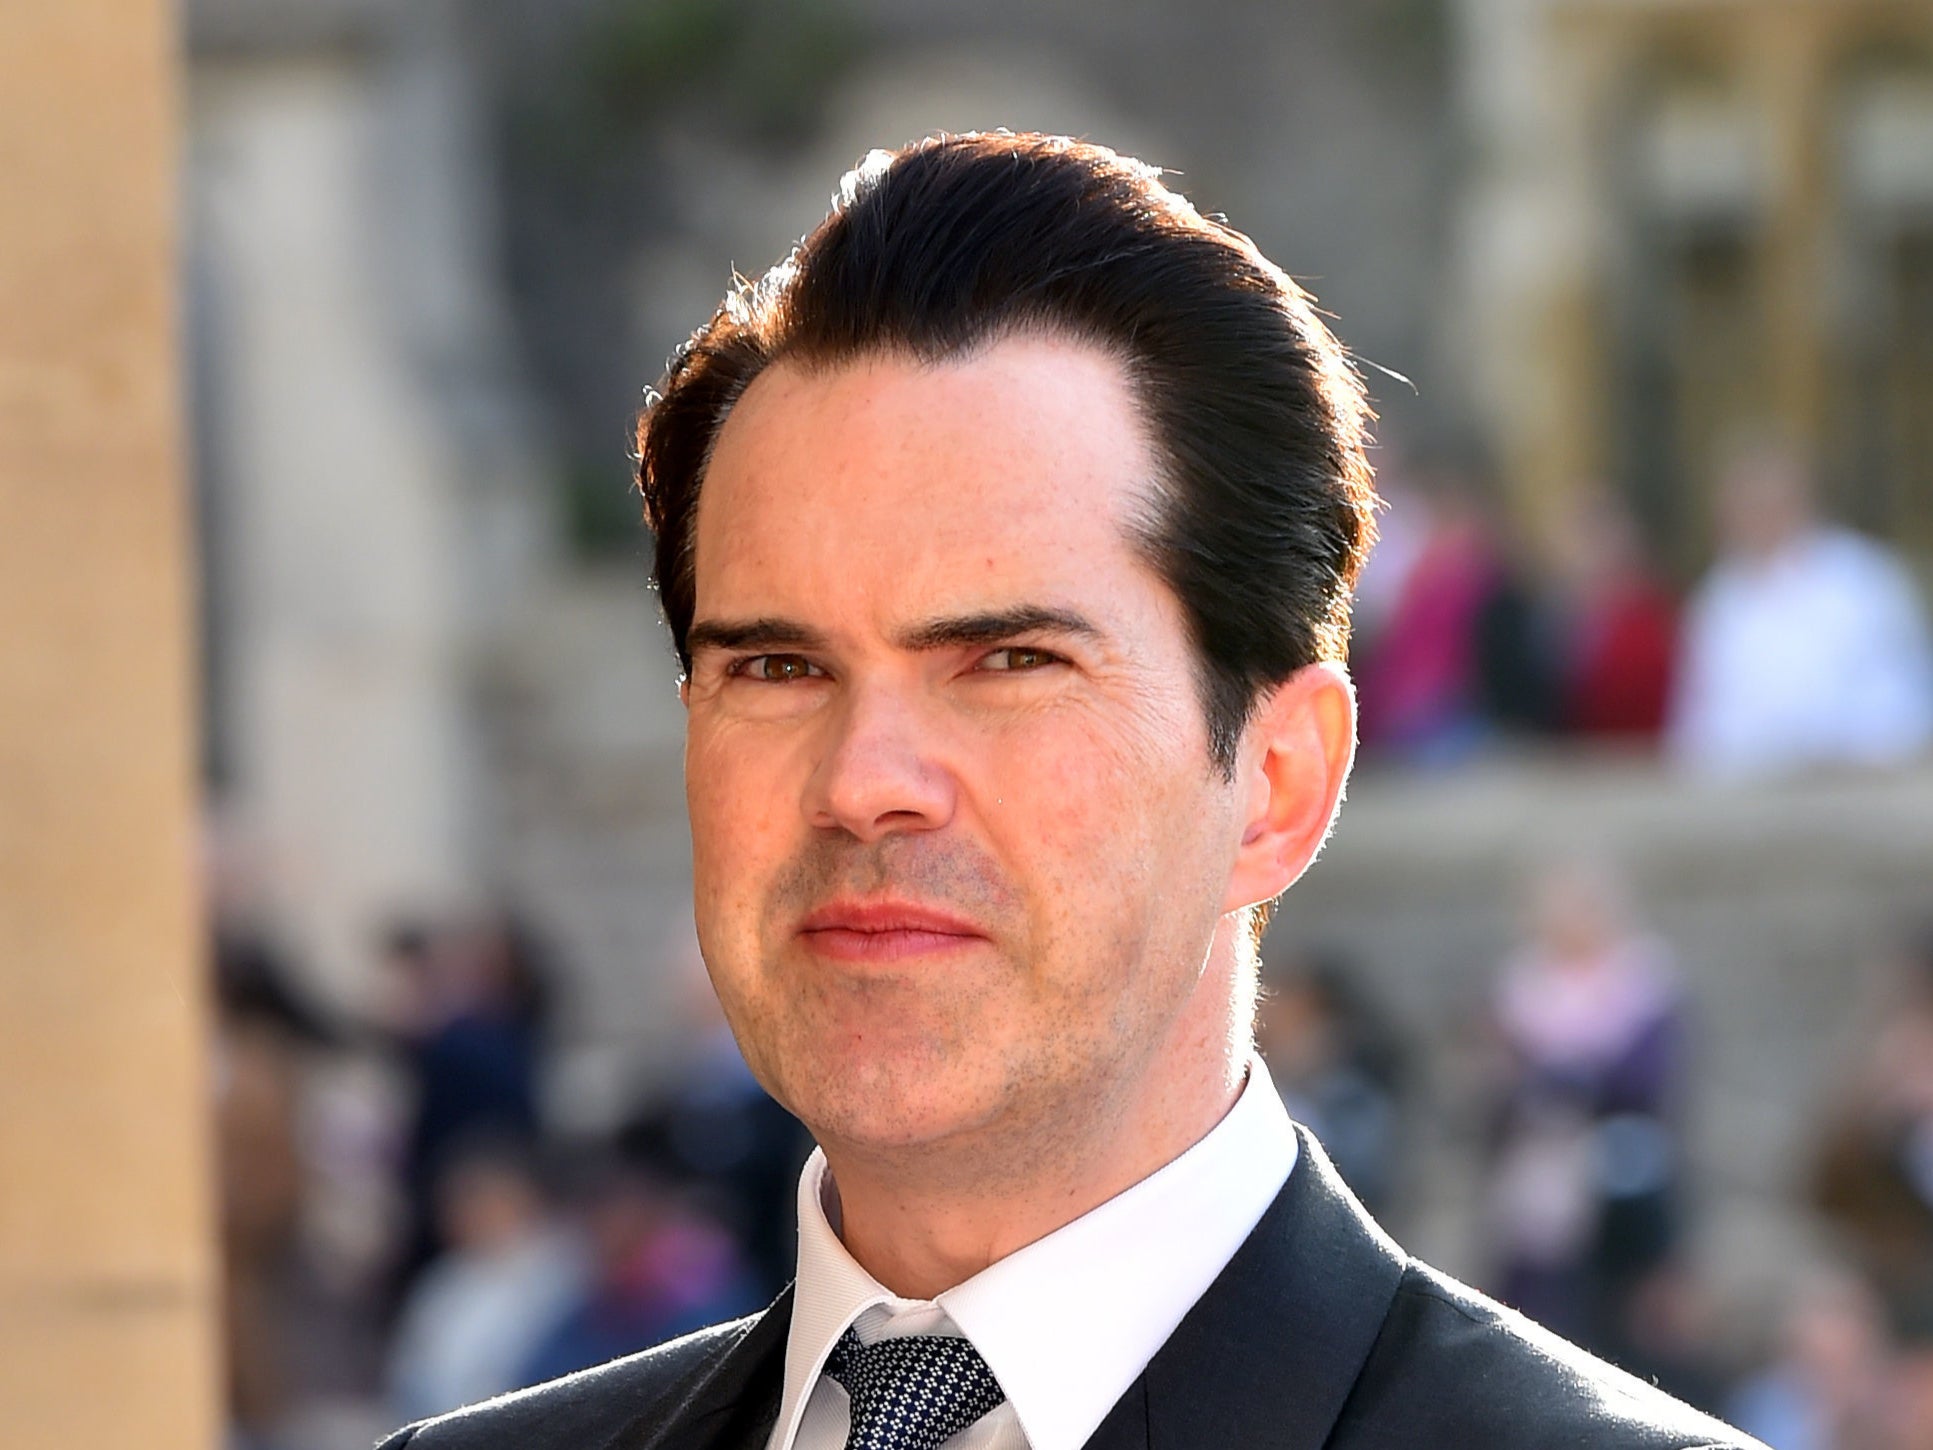 Jimmy Carr has been called out for a joke he made about Gypsies